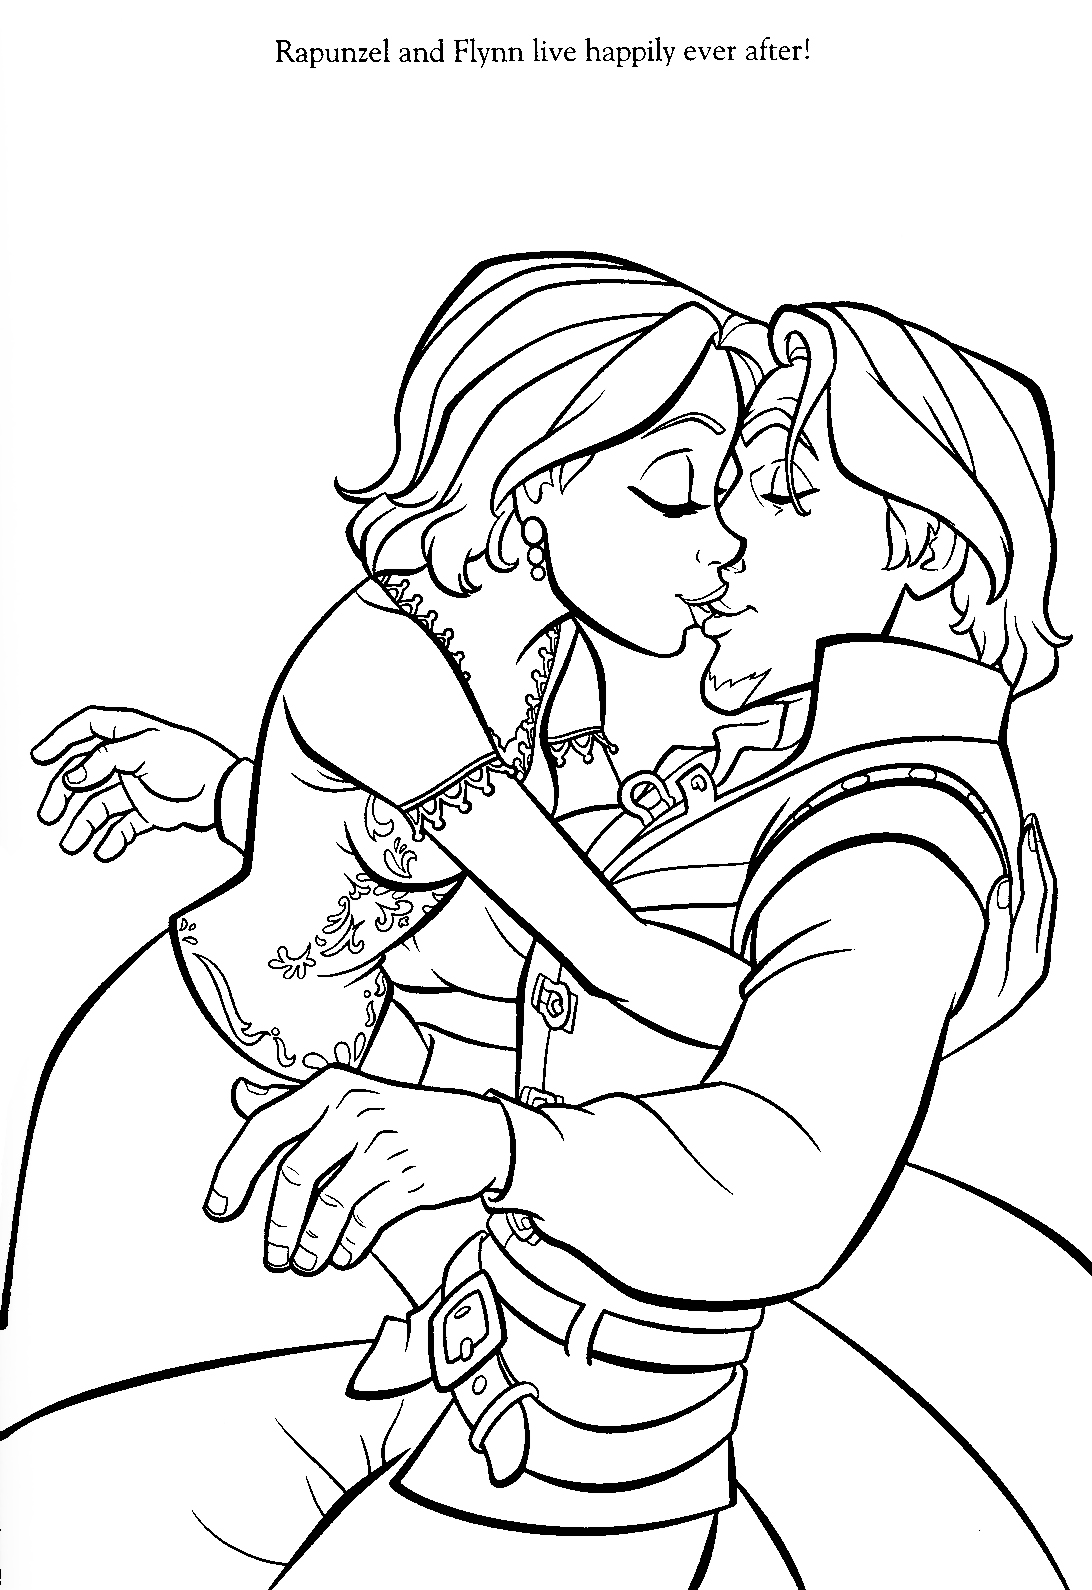 rapunzel-coloring-pages-best-coloring-pages-for-kids